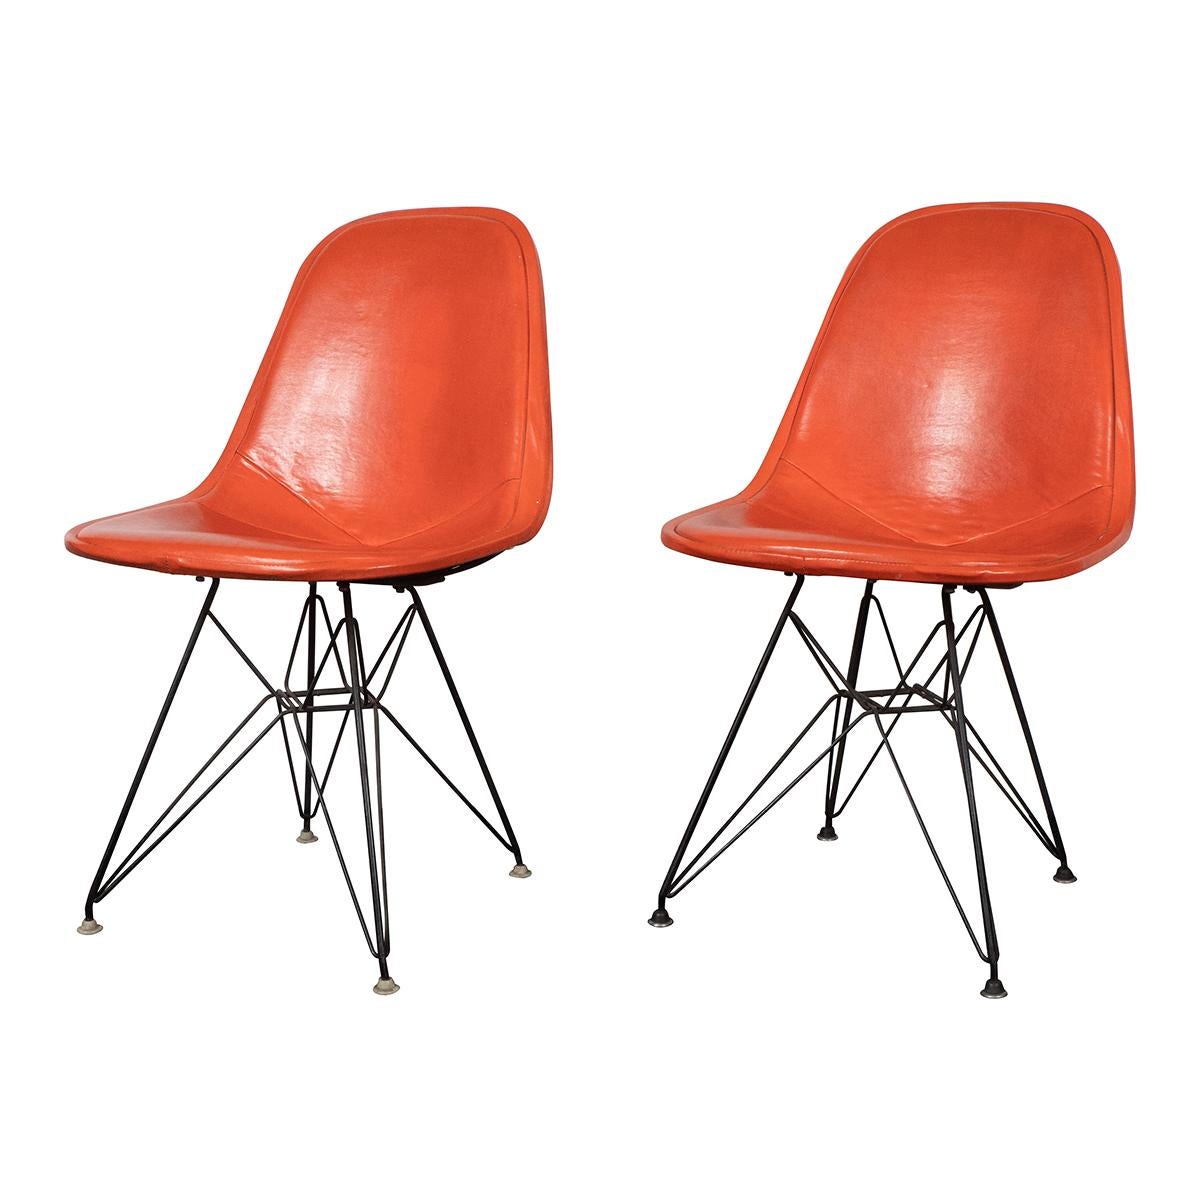 Pair of orange leather Eames DKX-1 side chairs for Herman Miller with original labels. Two pairs available. Sold as-is. Please note wear in leather upholstery.